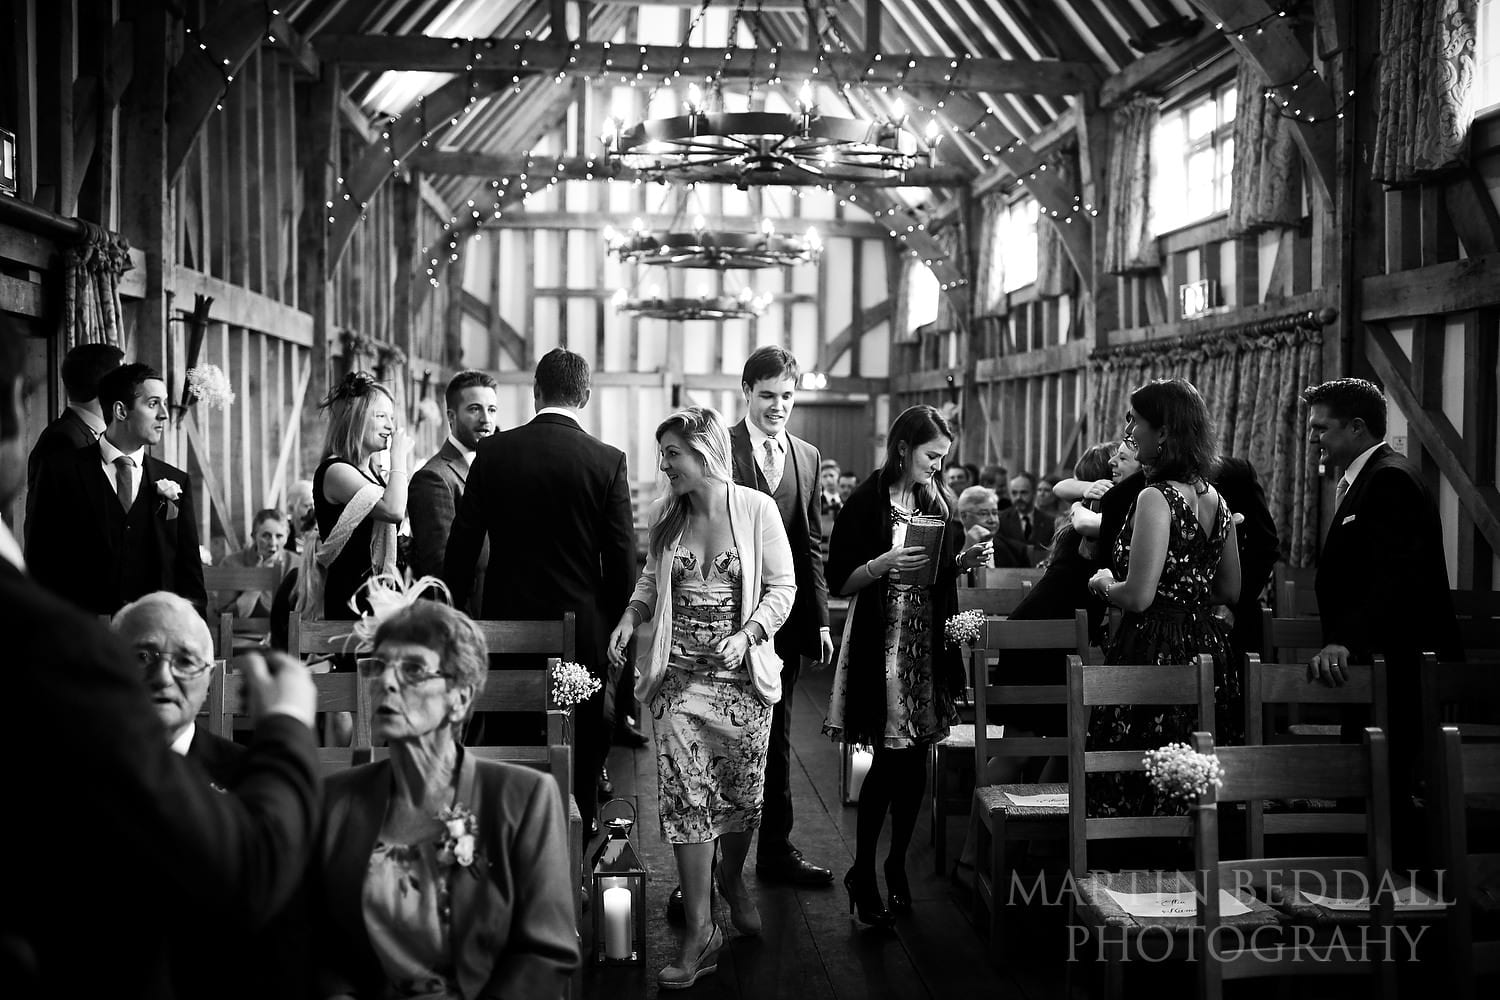 Guests take their seats for cthe ceremony at Gate St Barn